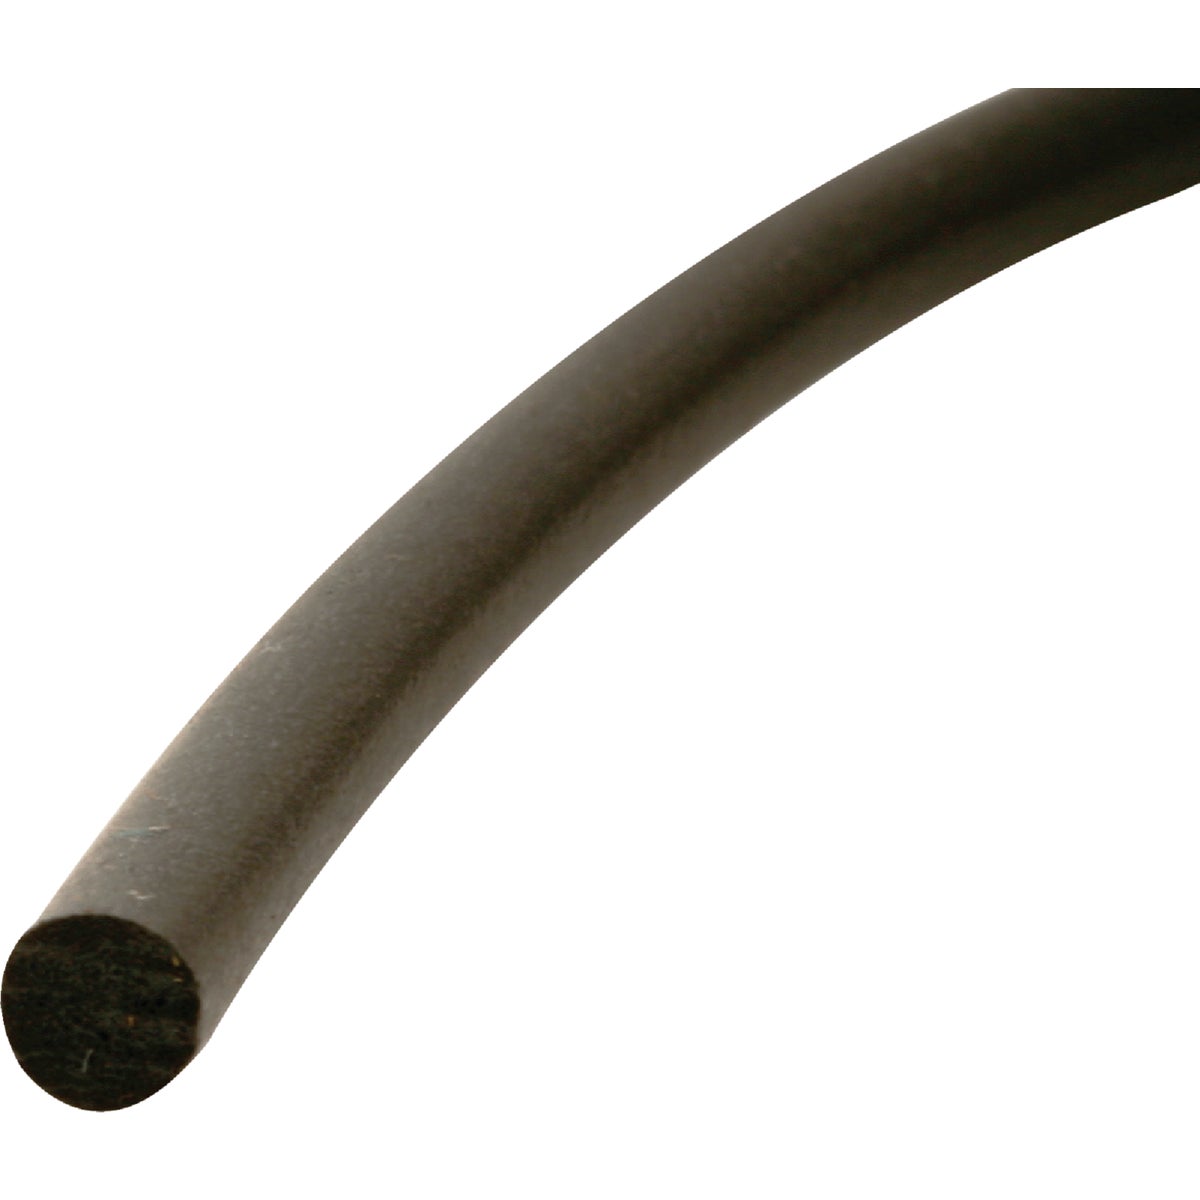 Item 261040, Foam screen spline compresses for a tight fit, is easy-to-install, and 